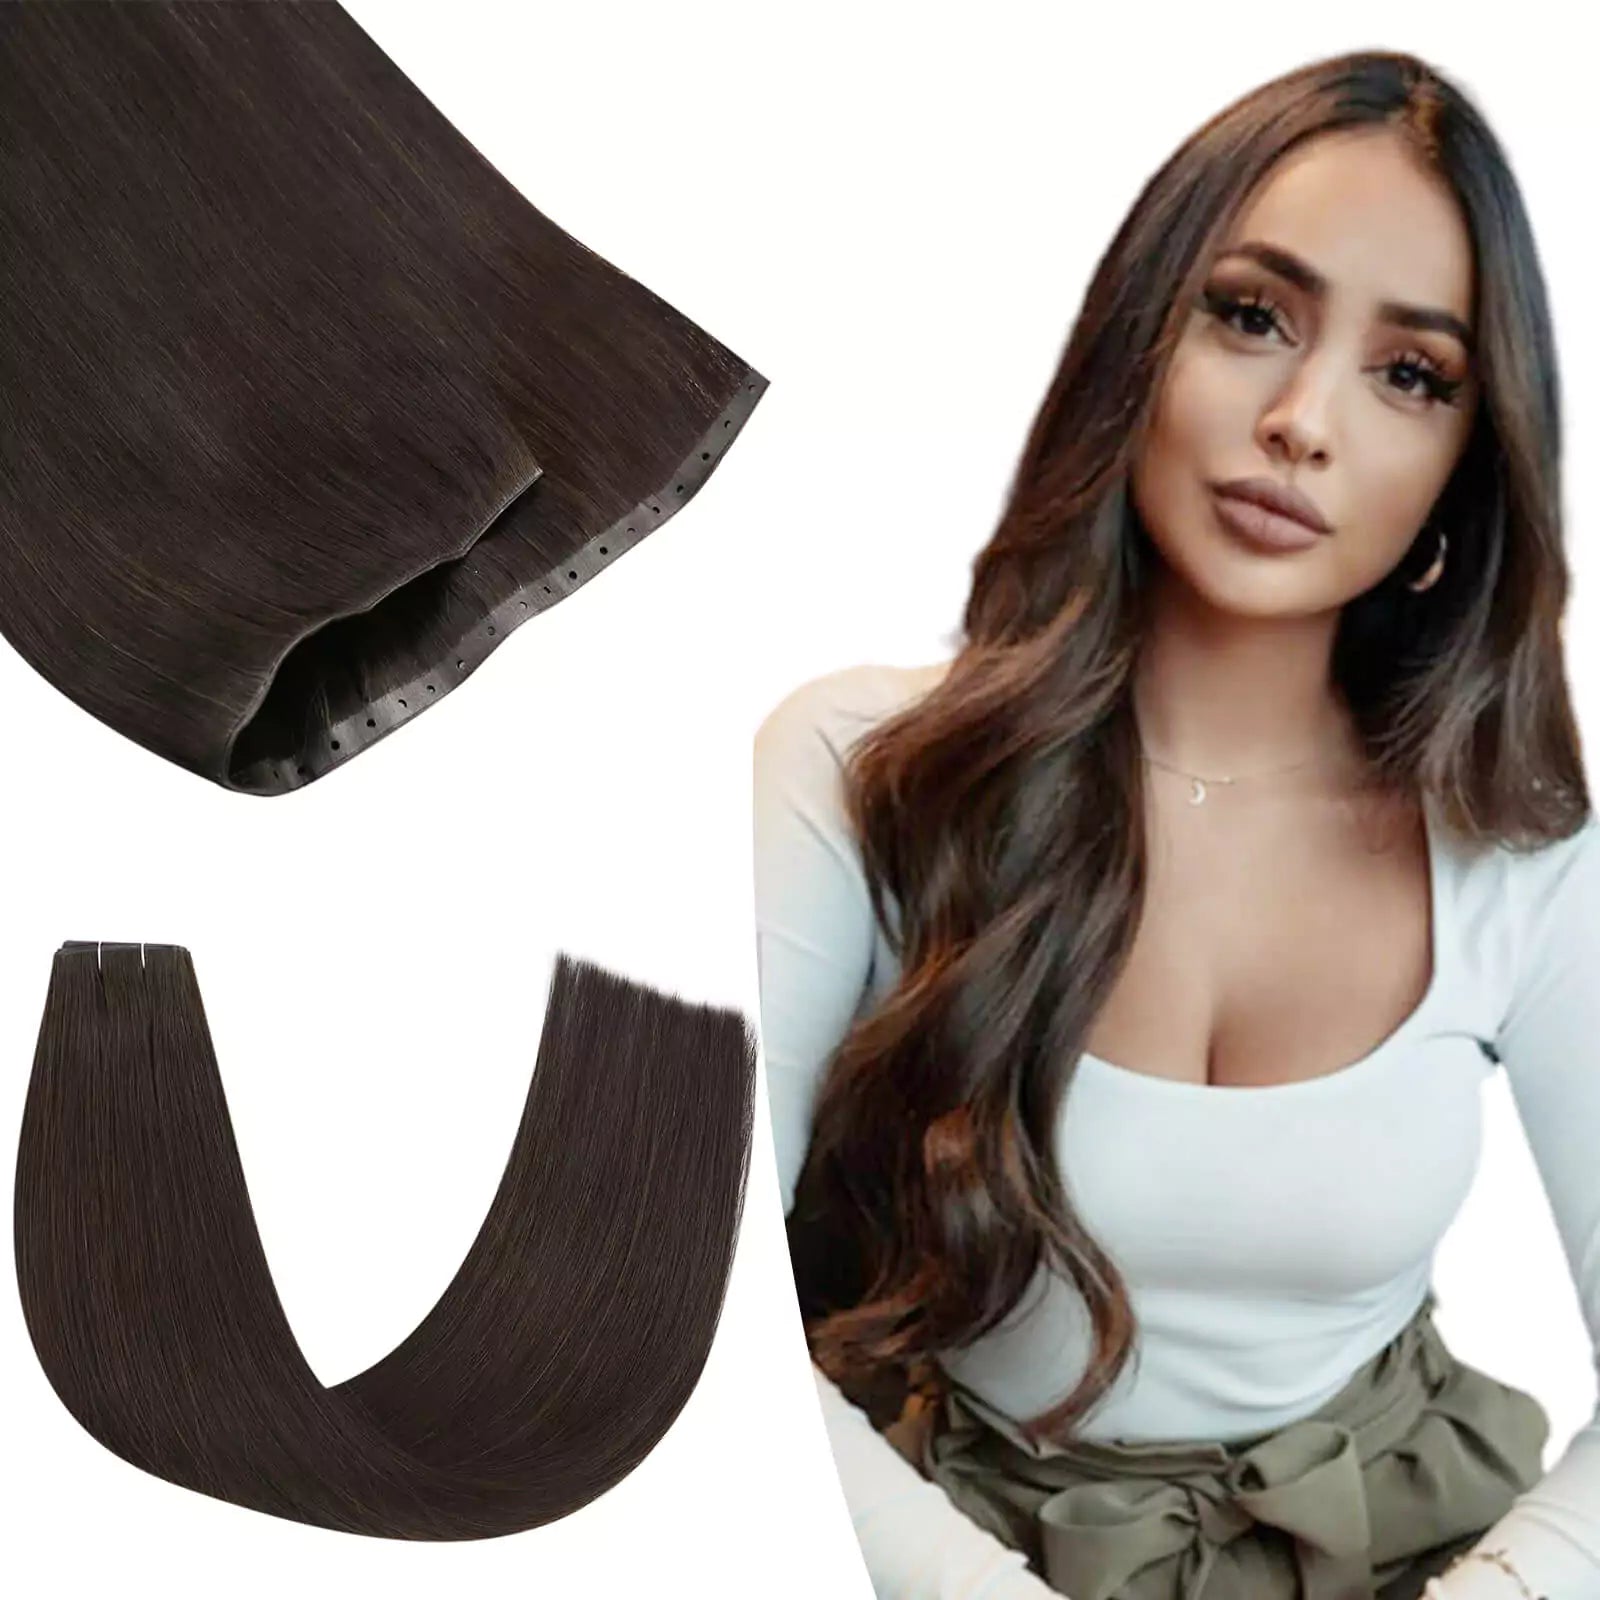 Seamless Injected PU Flat Weft With Hole Human Hair Darkest Brown